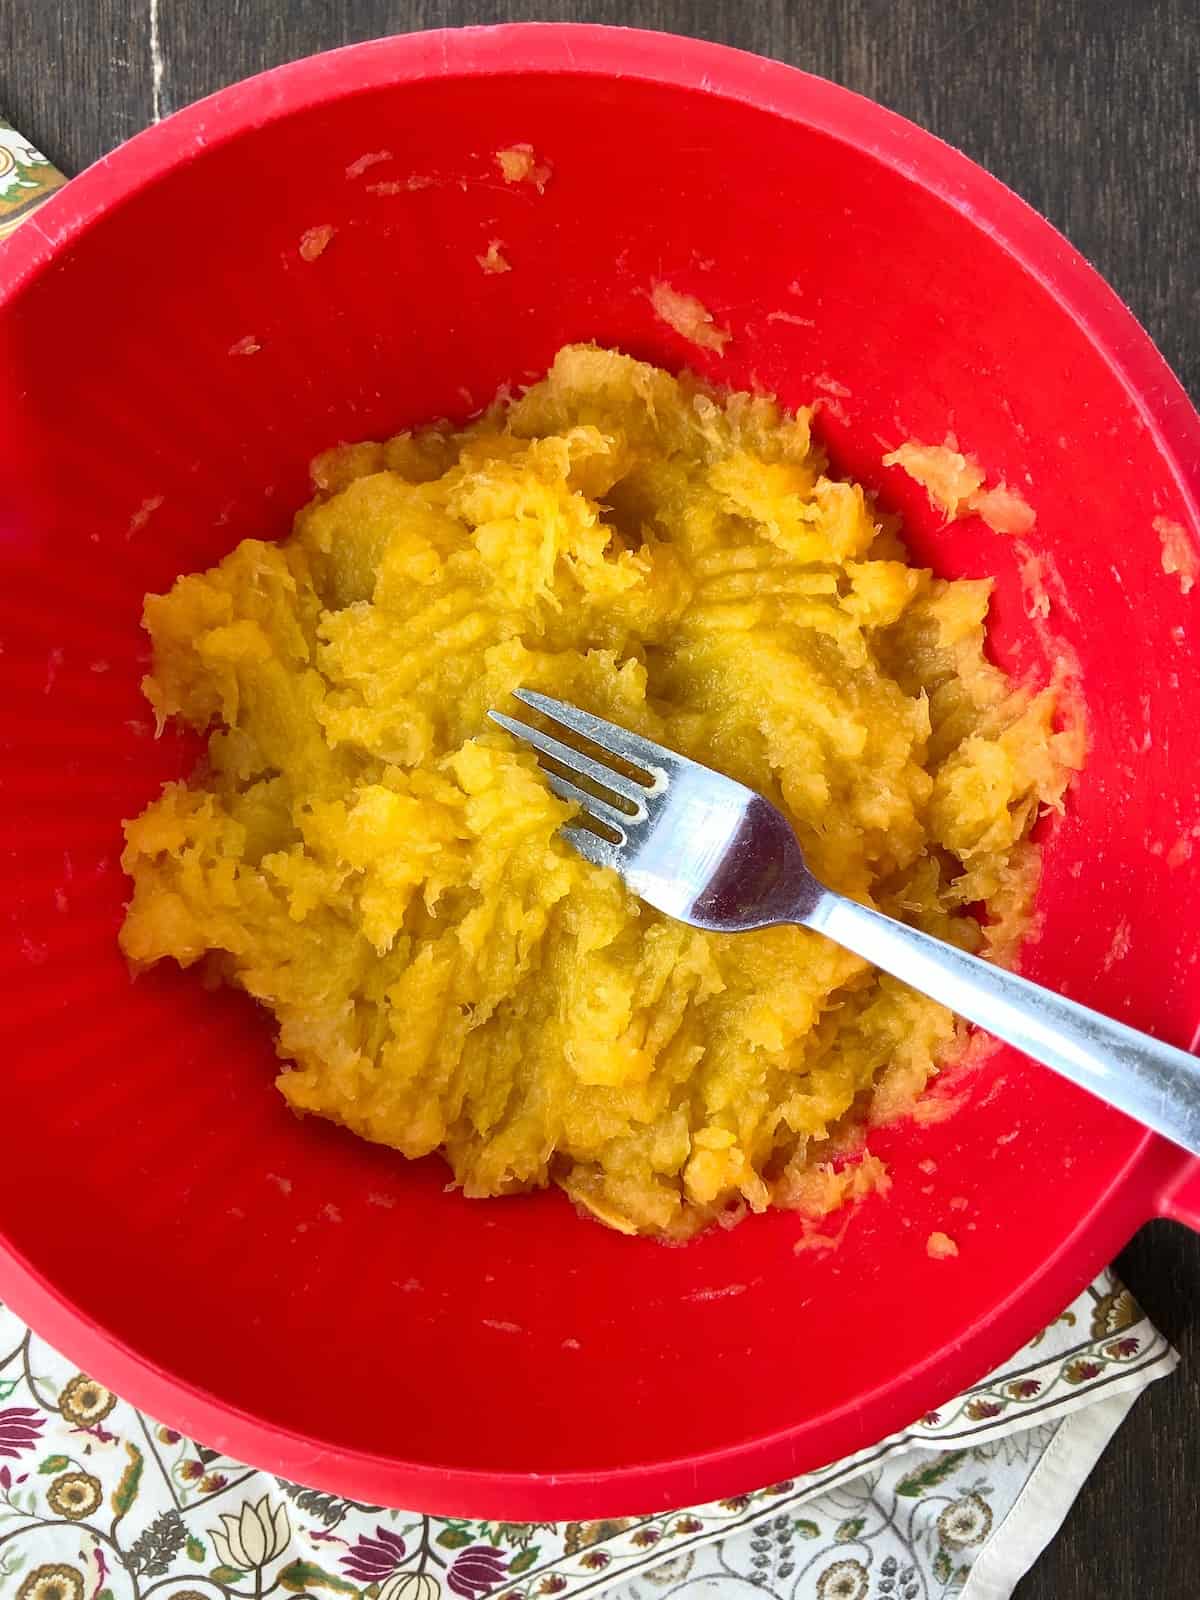 Cooked acorn squash in red bowl being mashed with fork.